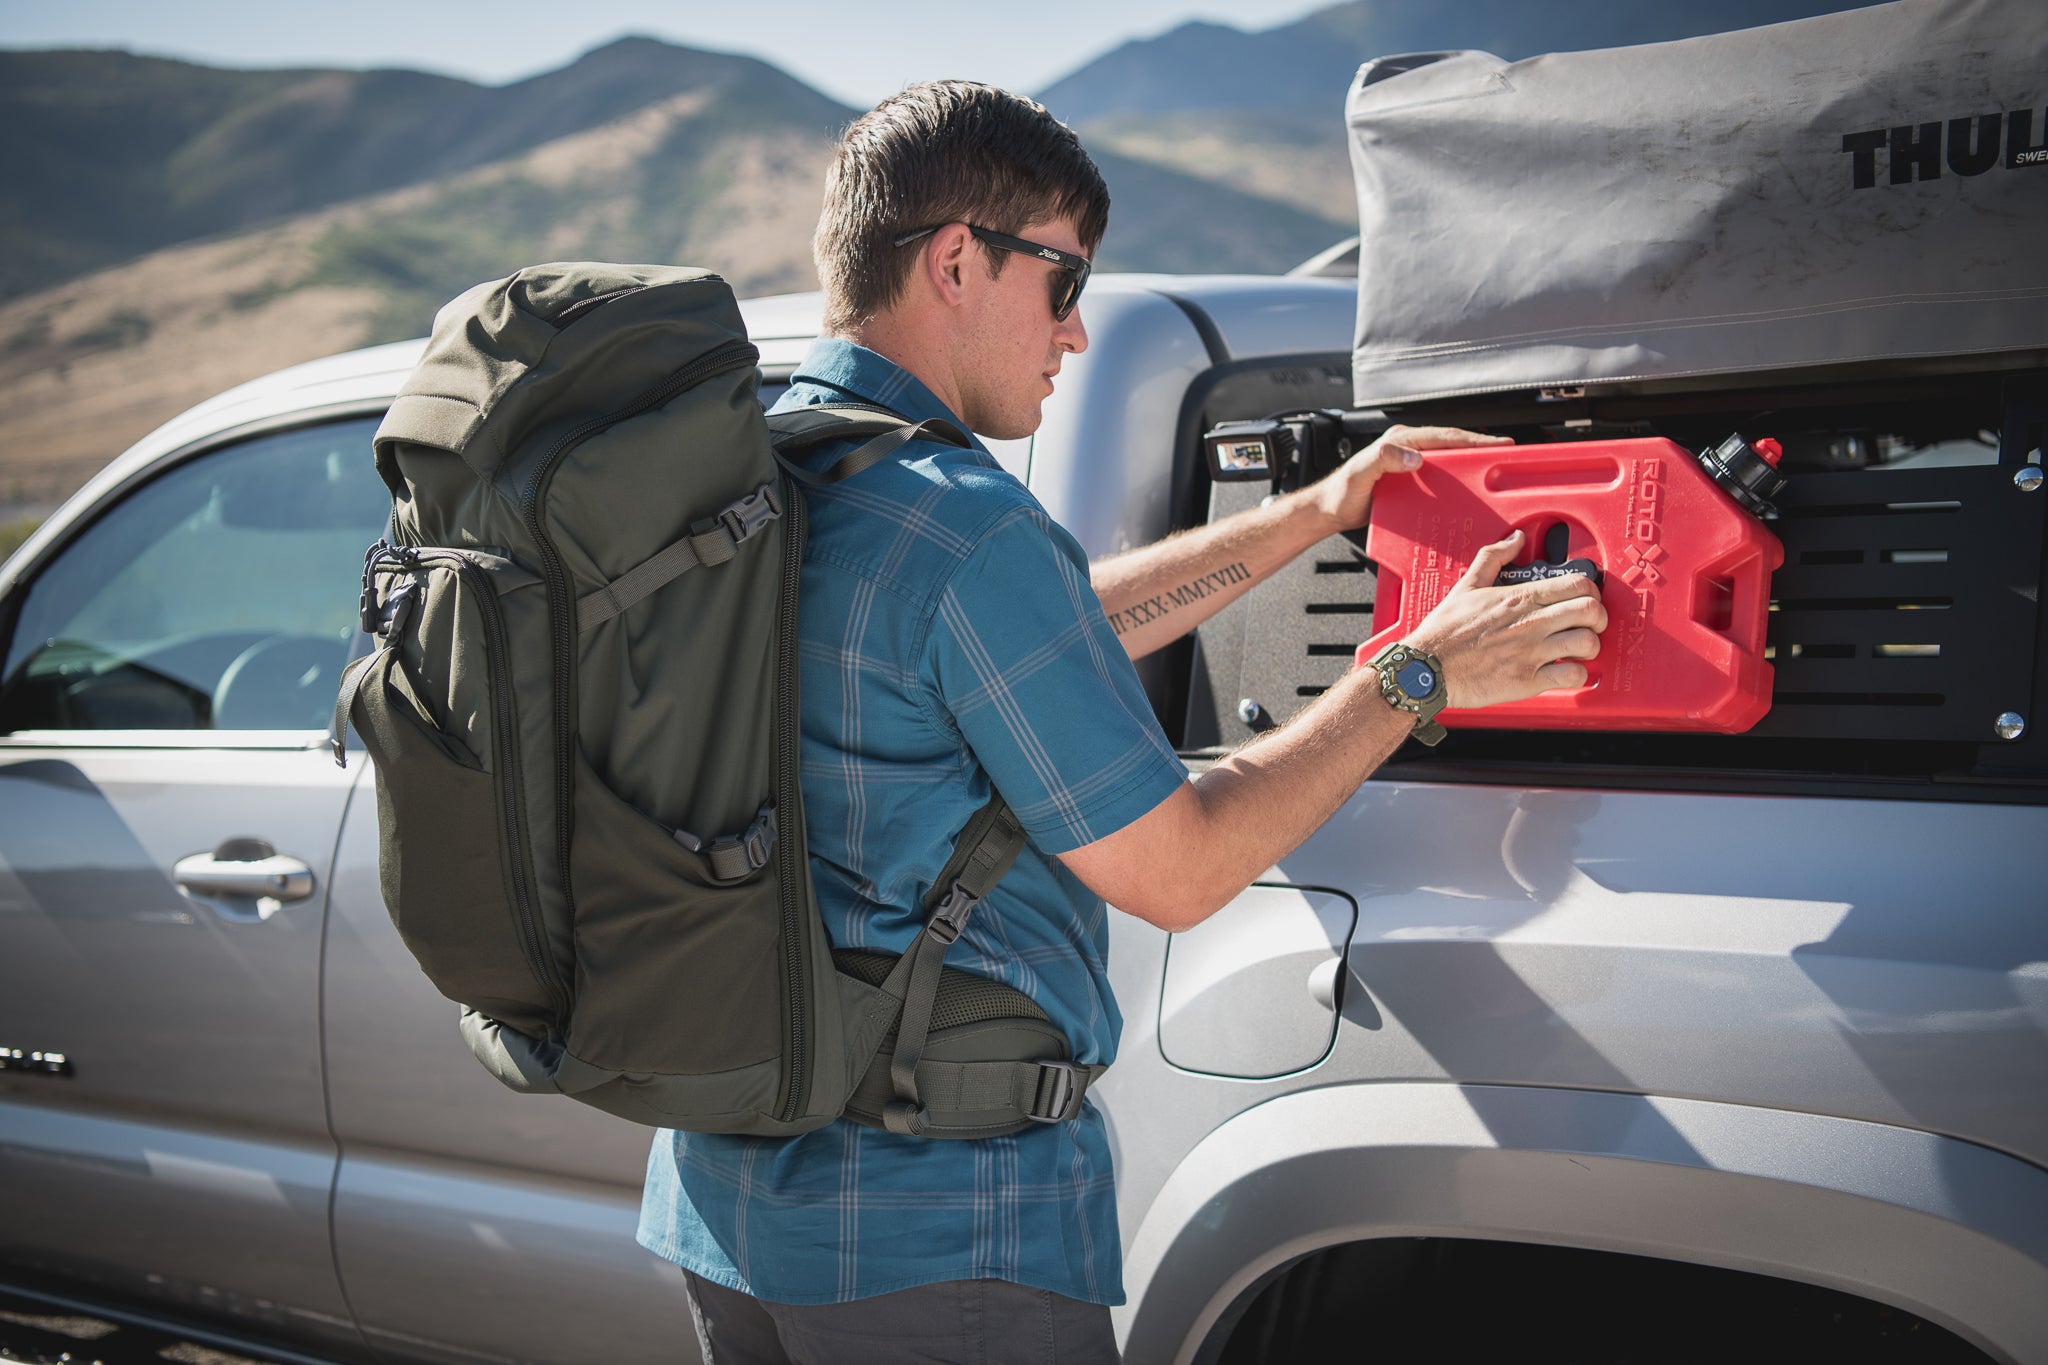 The Vertx Overlander backpack is the ideal backpack for all your outdoor adventures.